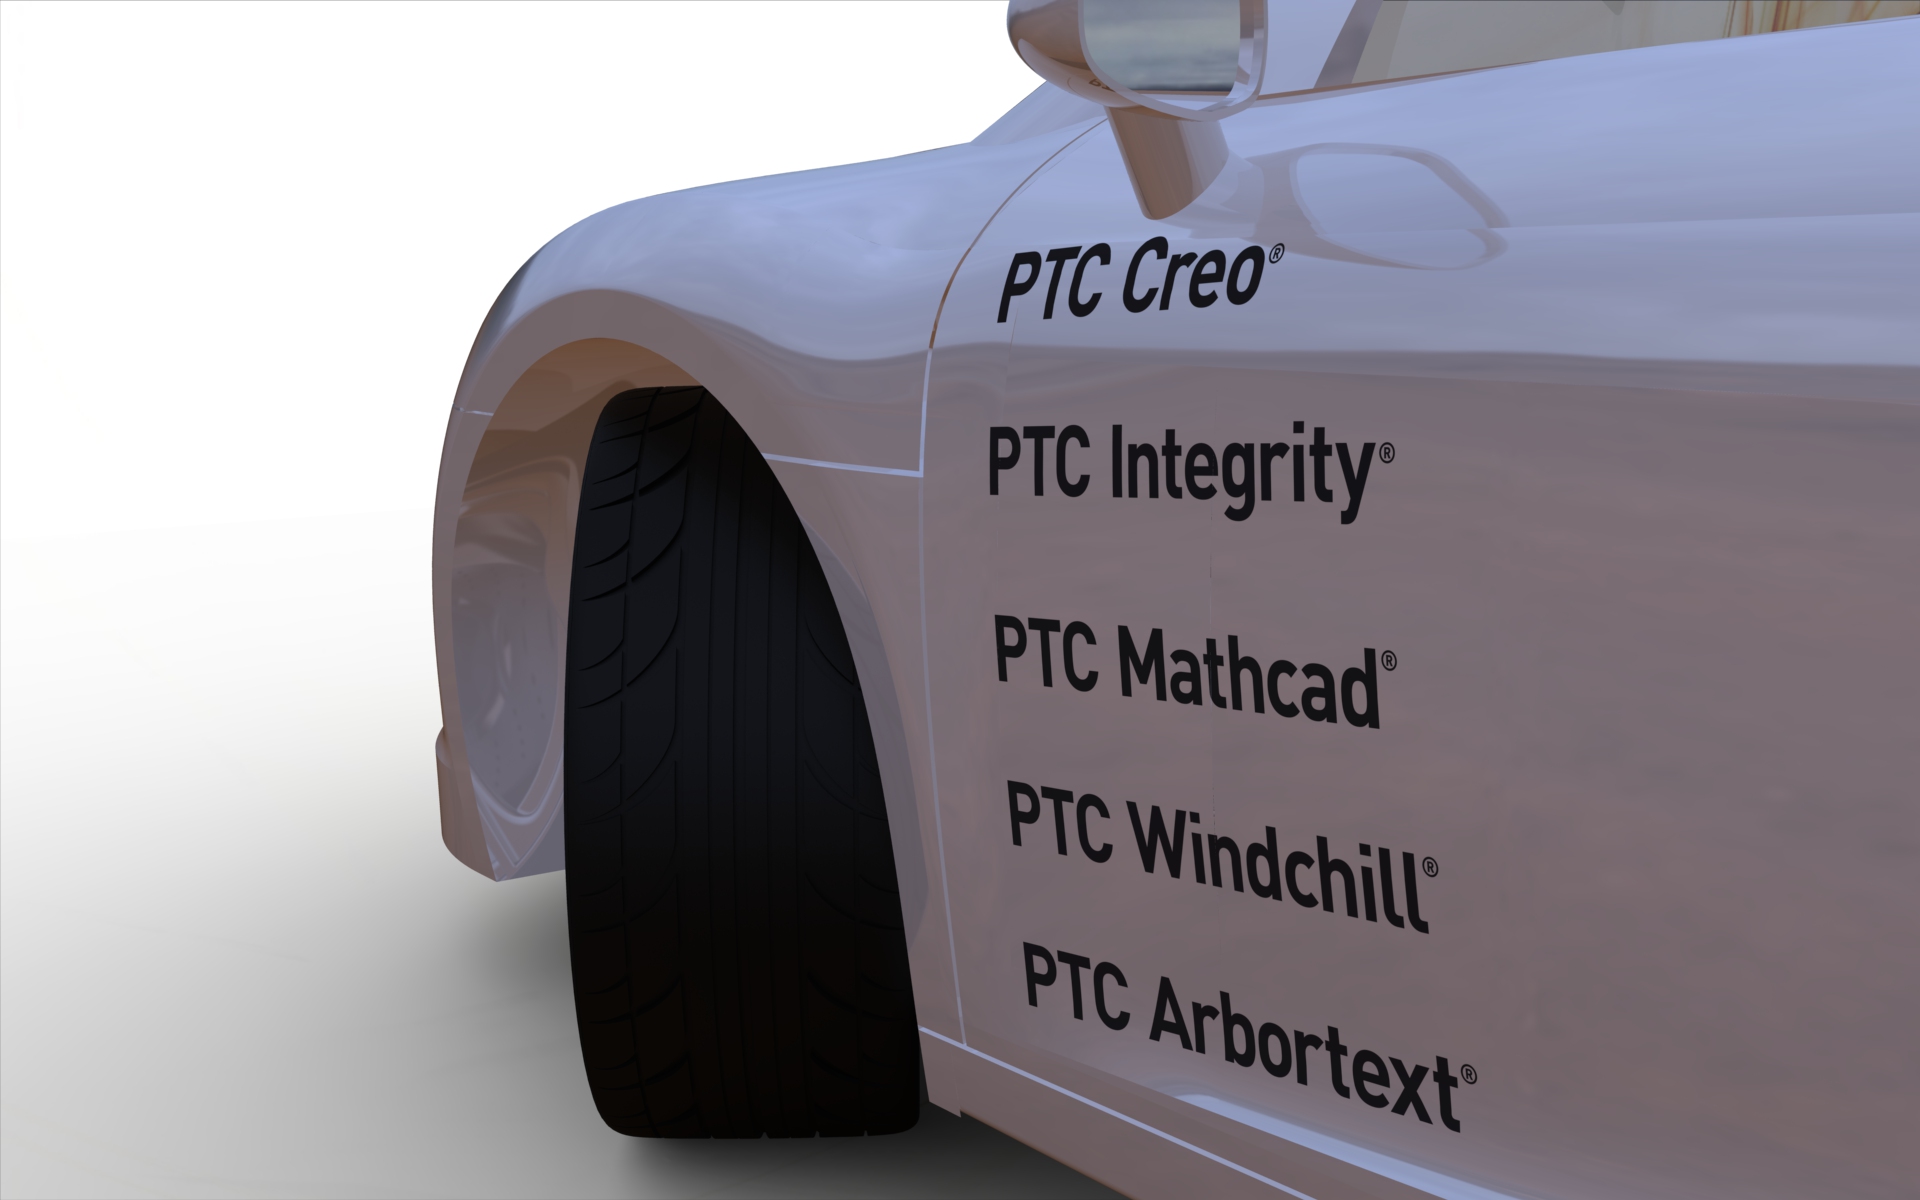 New PTC Product Names and Logos_a.jpg